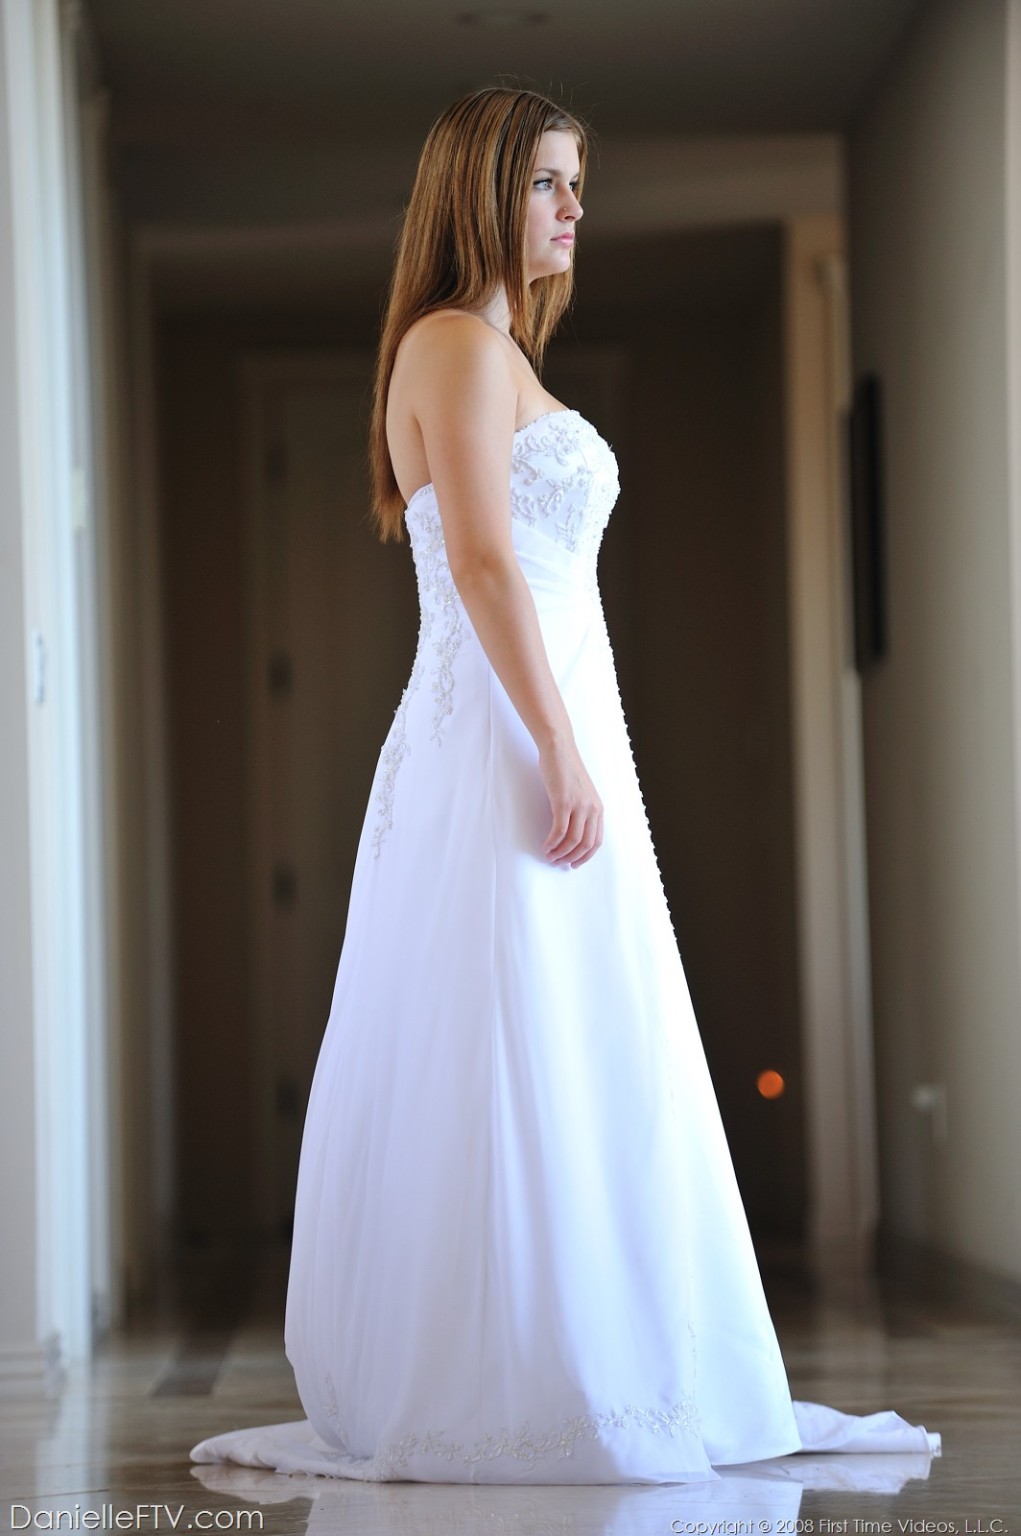 Danielle poses in a long white gown #71325203